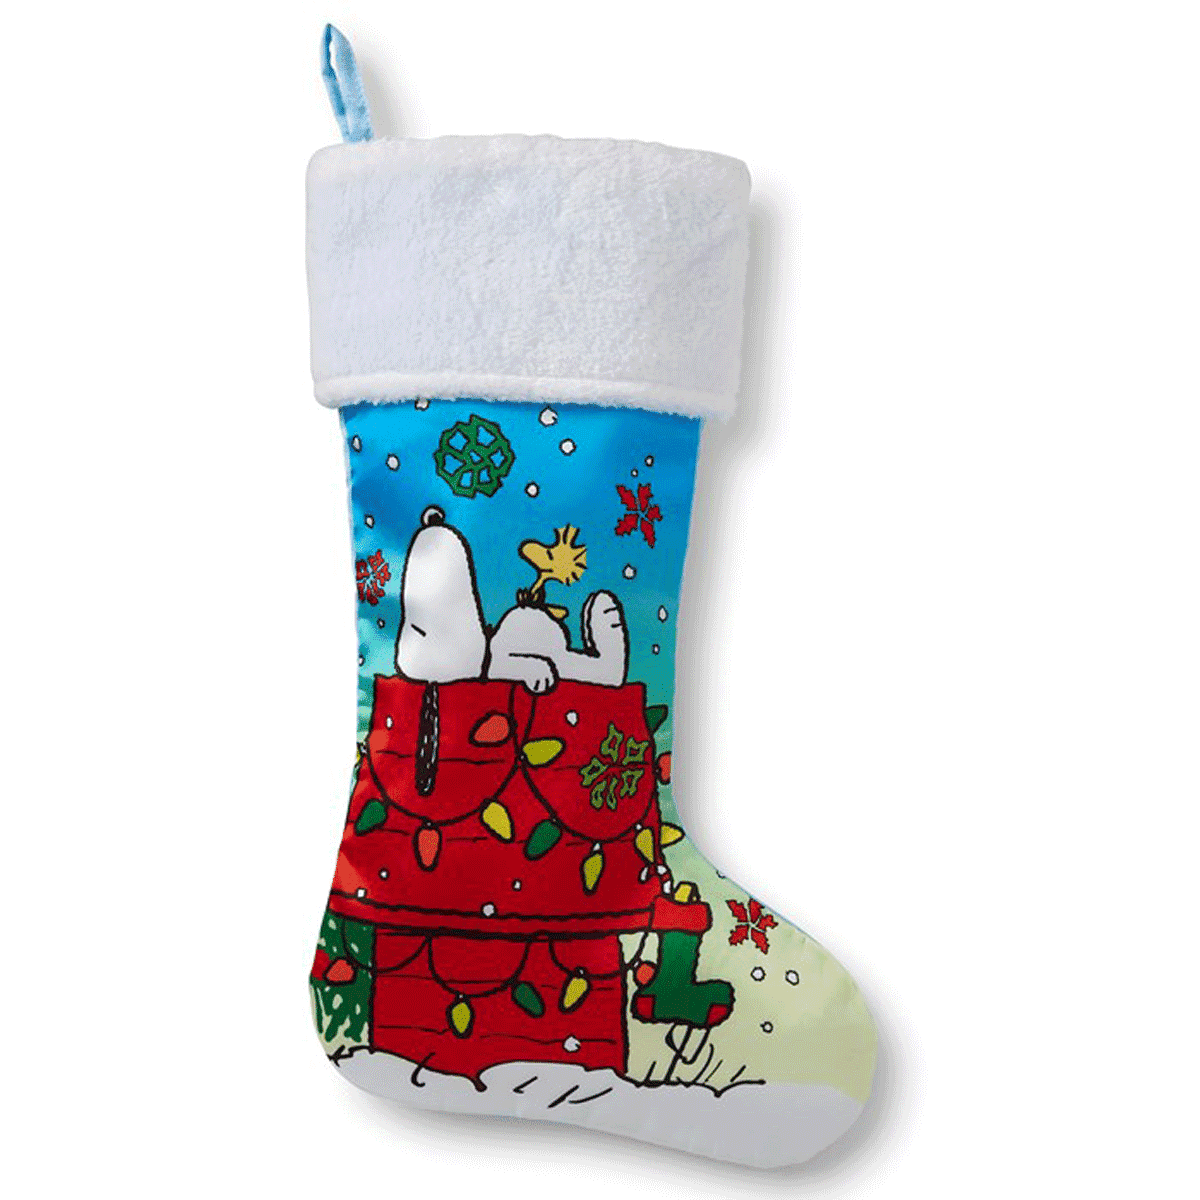 NEW Peanuts Snoopy Hanging STOCKING Snowflake Felt Red With Snoopy And Woodsto 